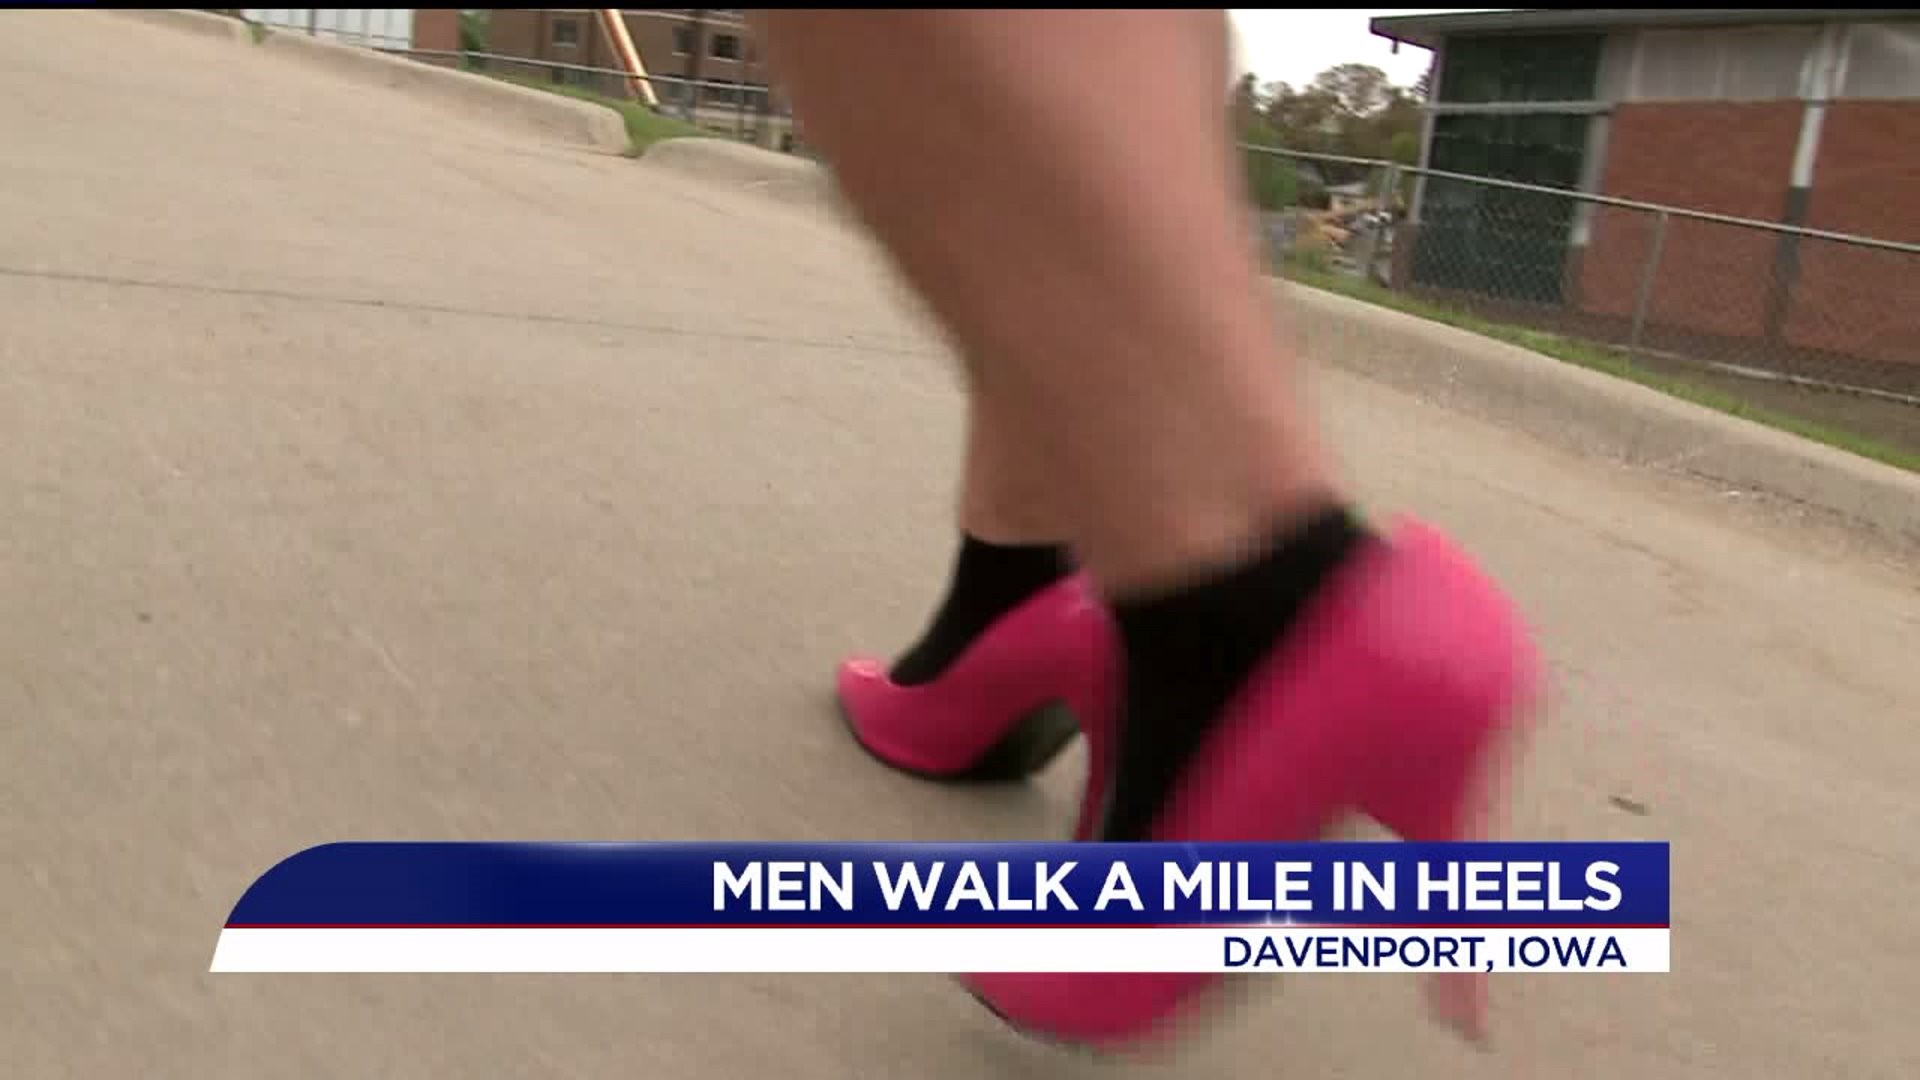 Walk A Mile in her shoes